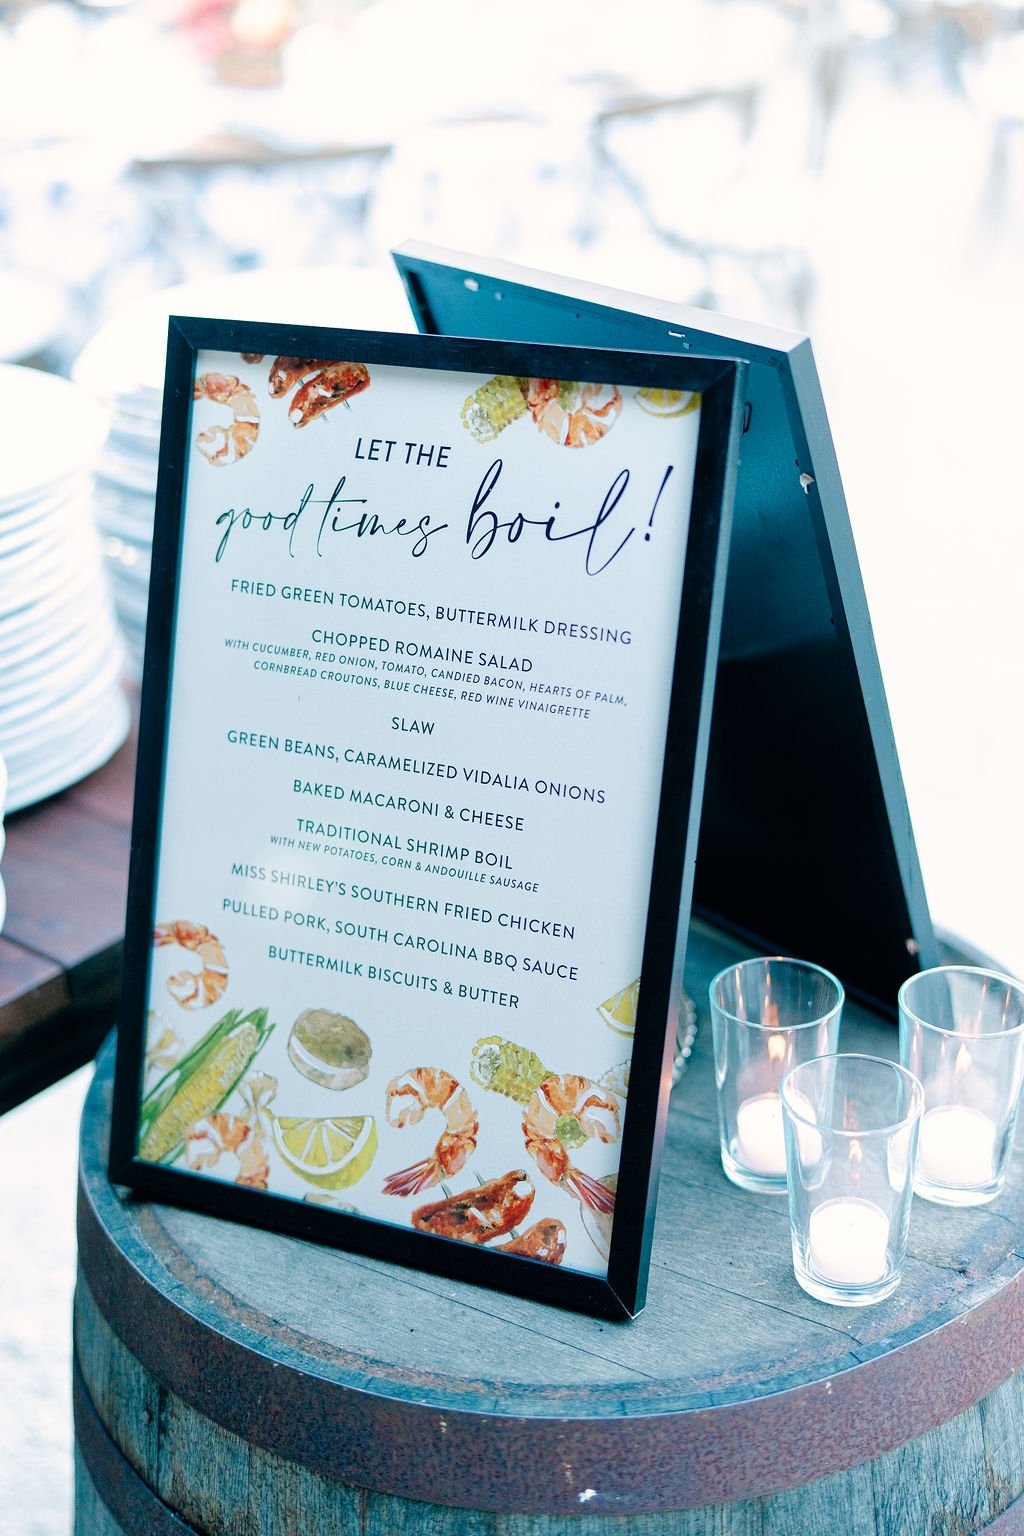 Let the good times boil! These custom menus made for the perfect southern touch to this grab-and-go style rehearsal dinner. 🦀 

#wedding #luxurywedding #weddingplanner #destinationweddingplanner